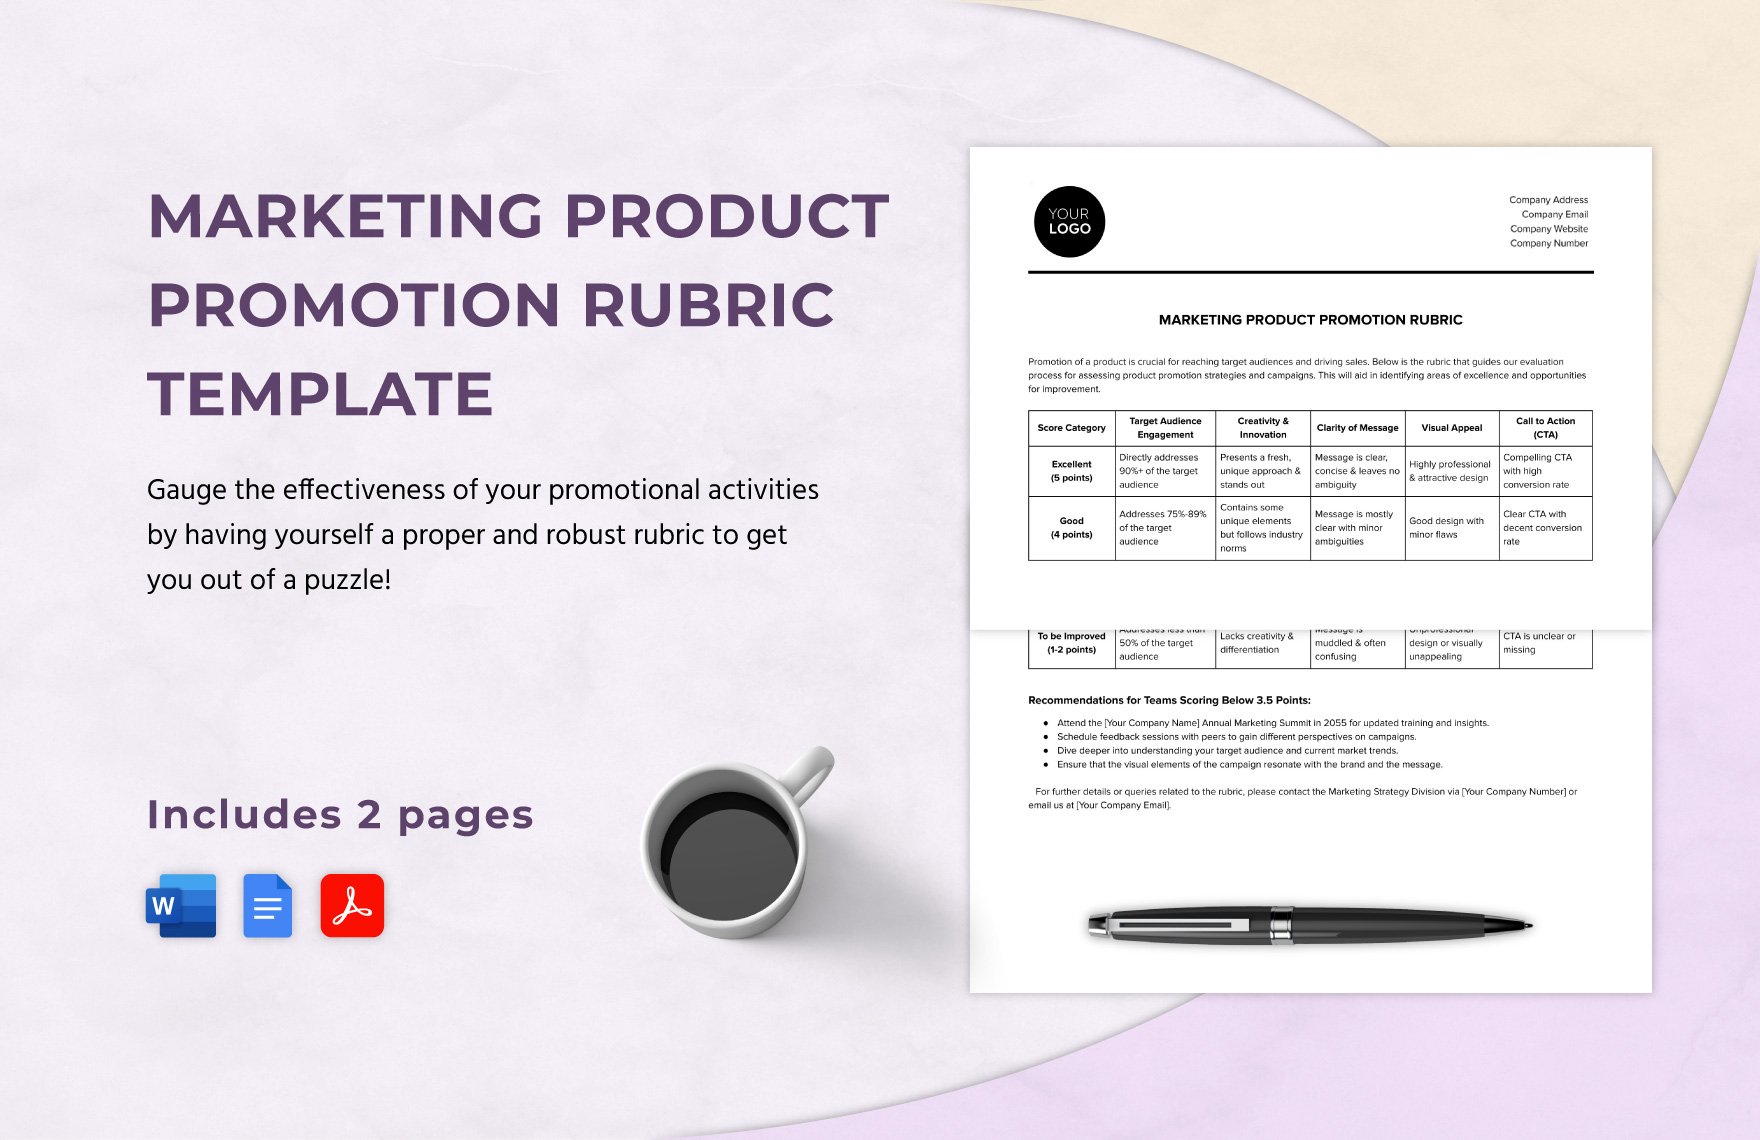 Marketing Product Promotion Rubric Template in Word, Google Docs, PDF